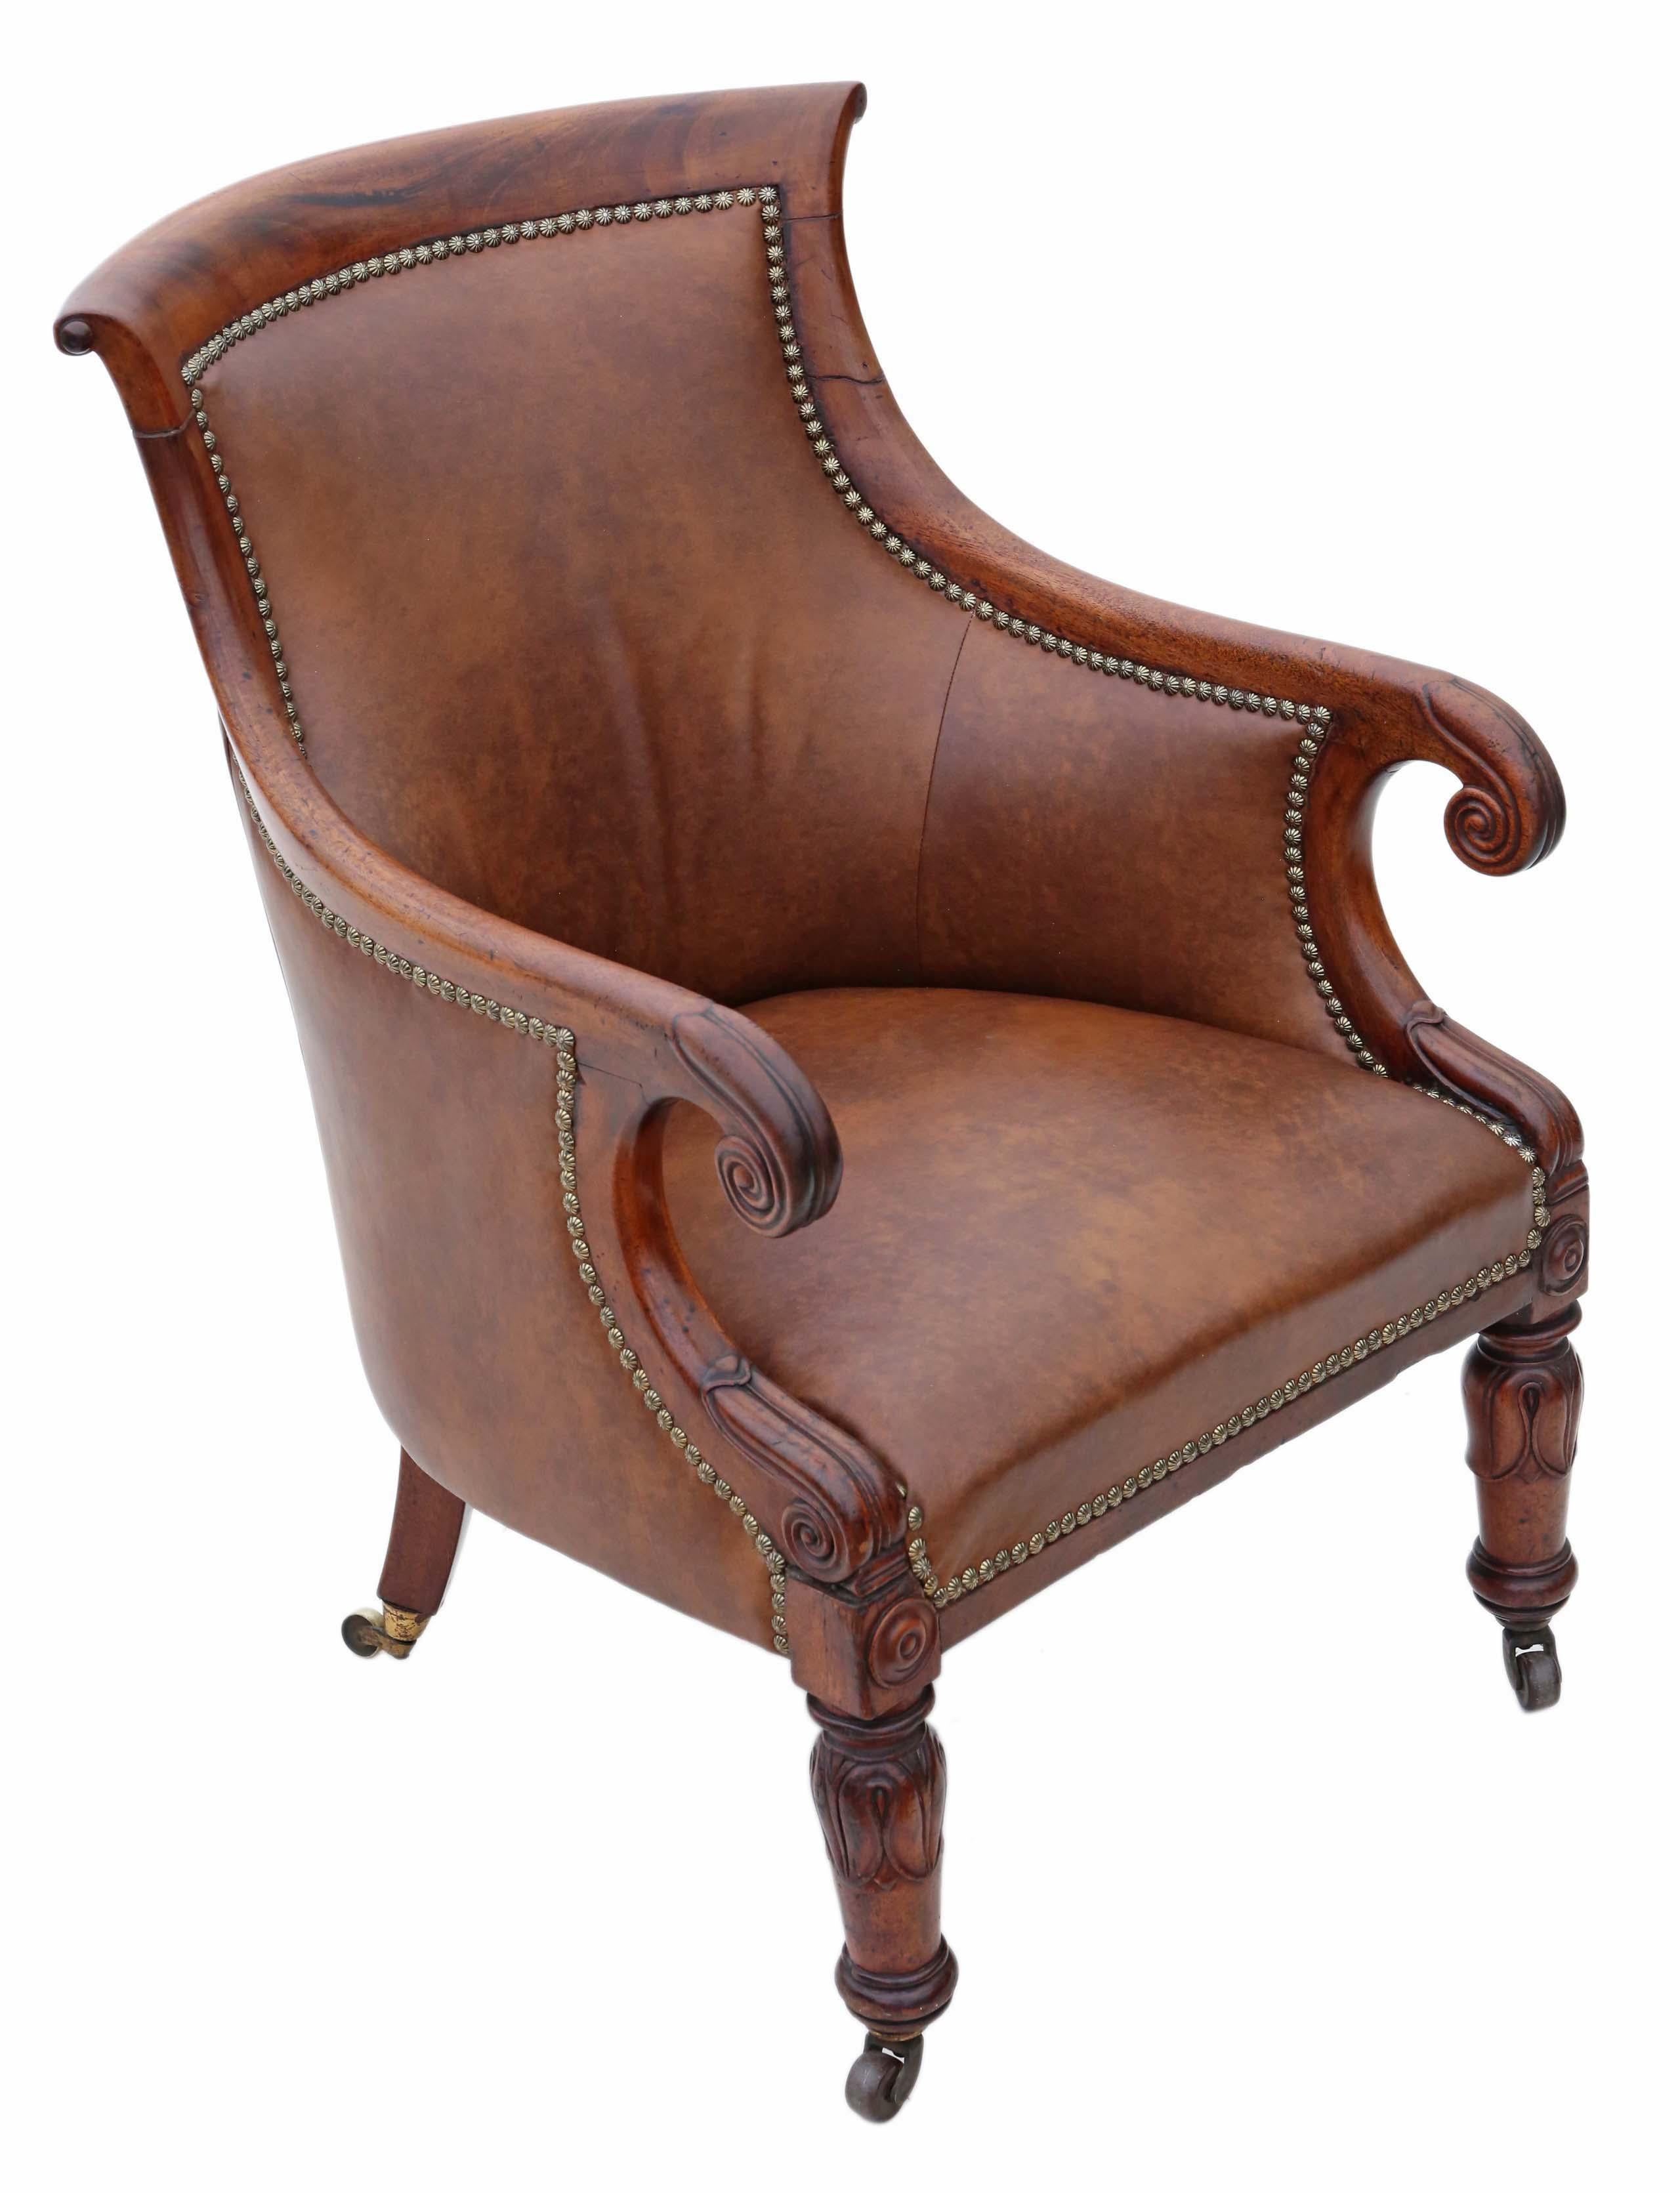 Antique quality Regency circa 1825-1835 mahogany and leather library chair or armchair.
Solid with no loose joints and no woodworm. Full of age, character and charm. An elegant attractive chair with good age and patina. Recent brown leather